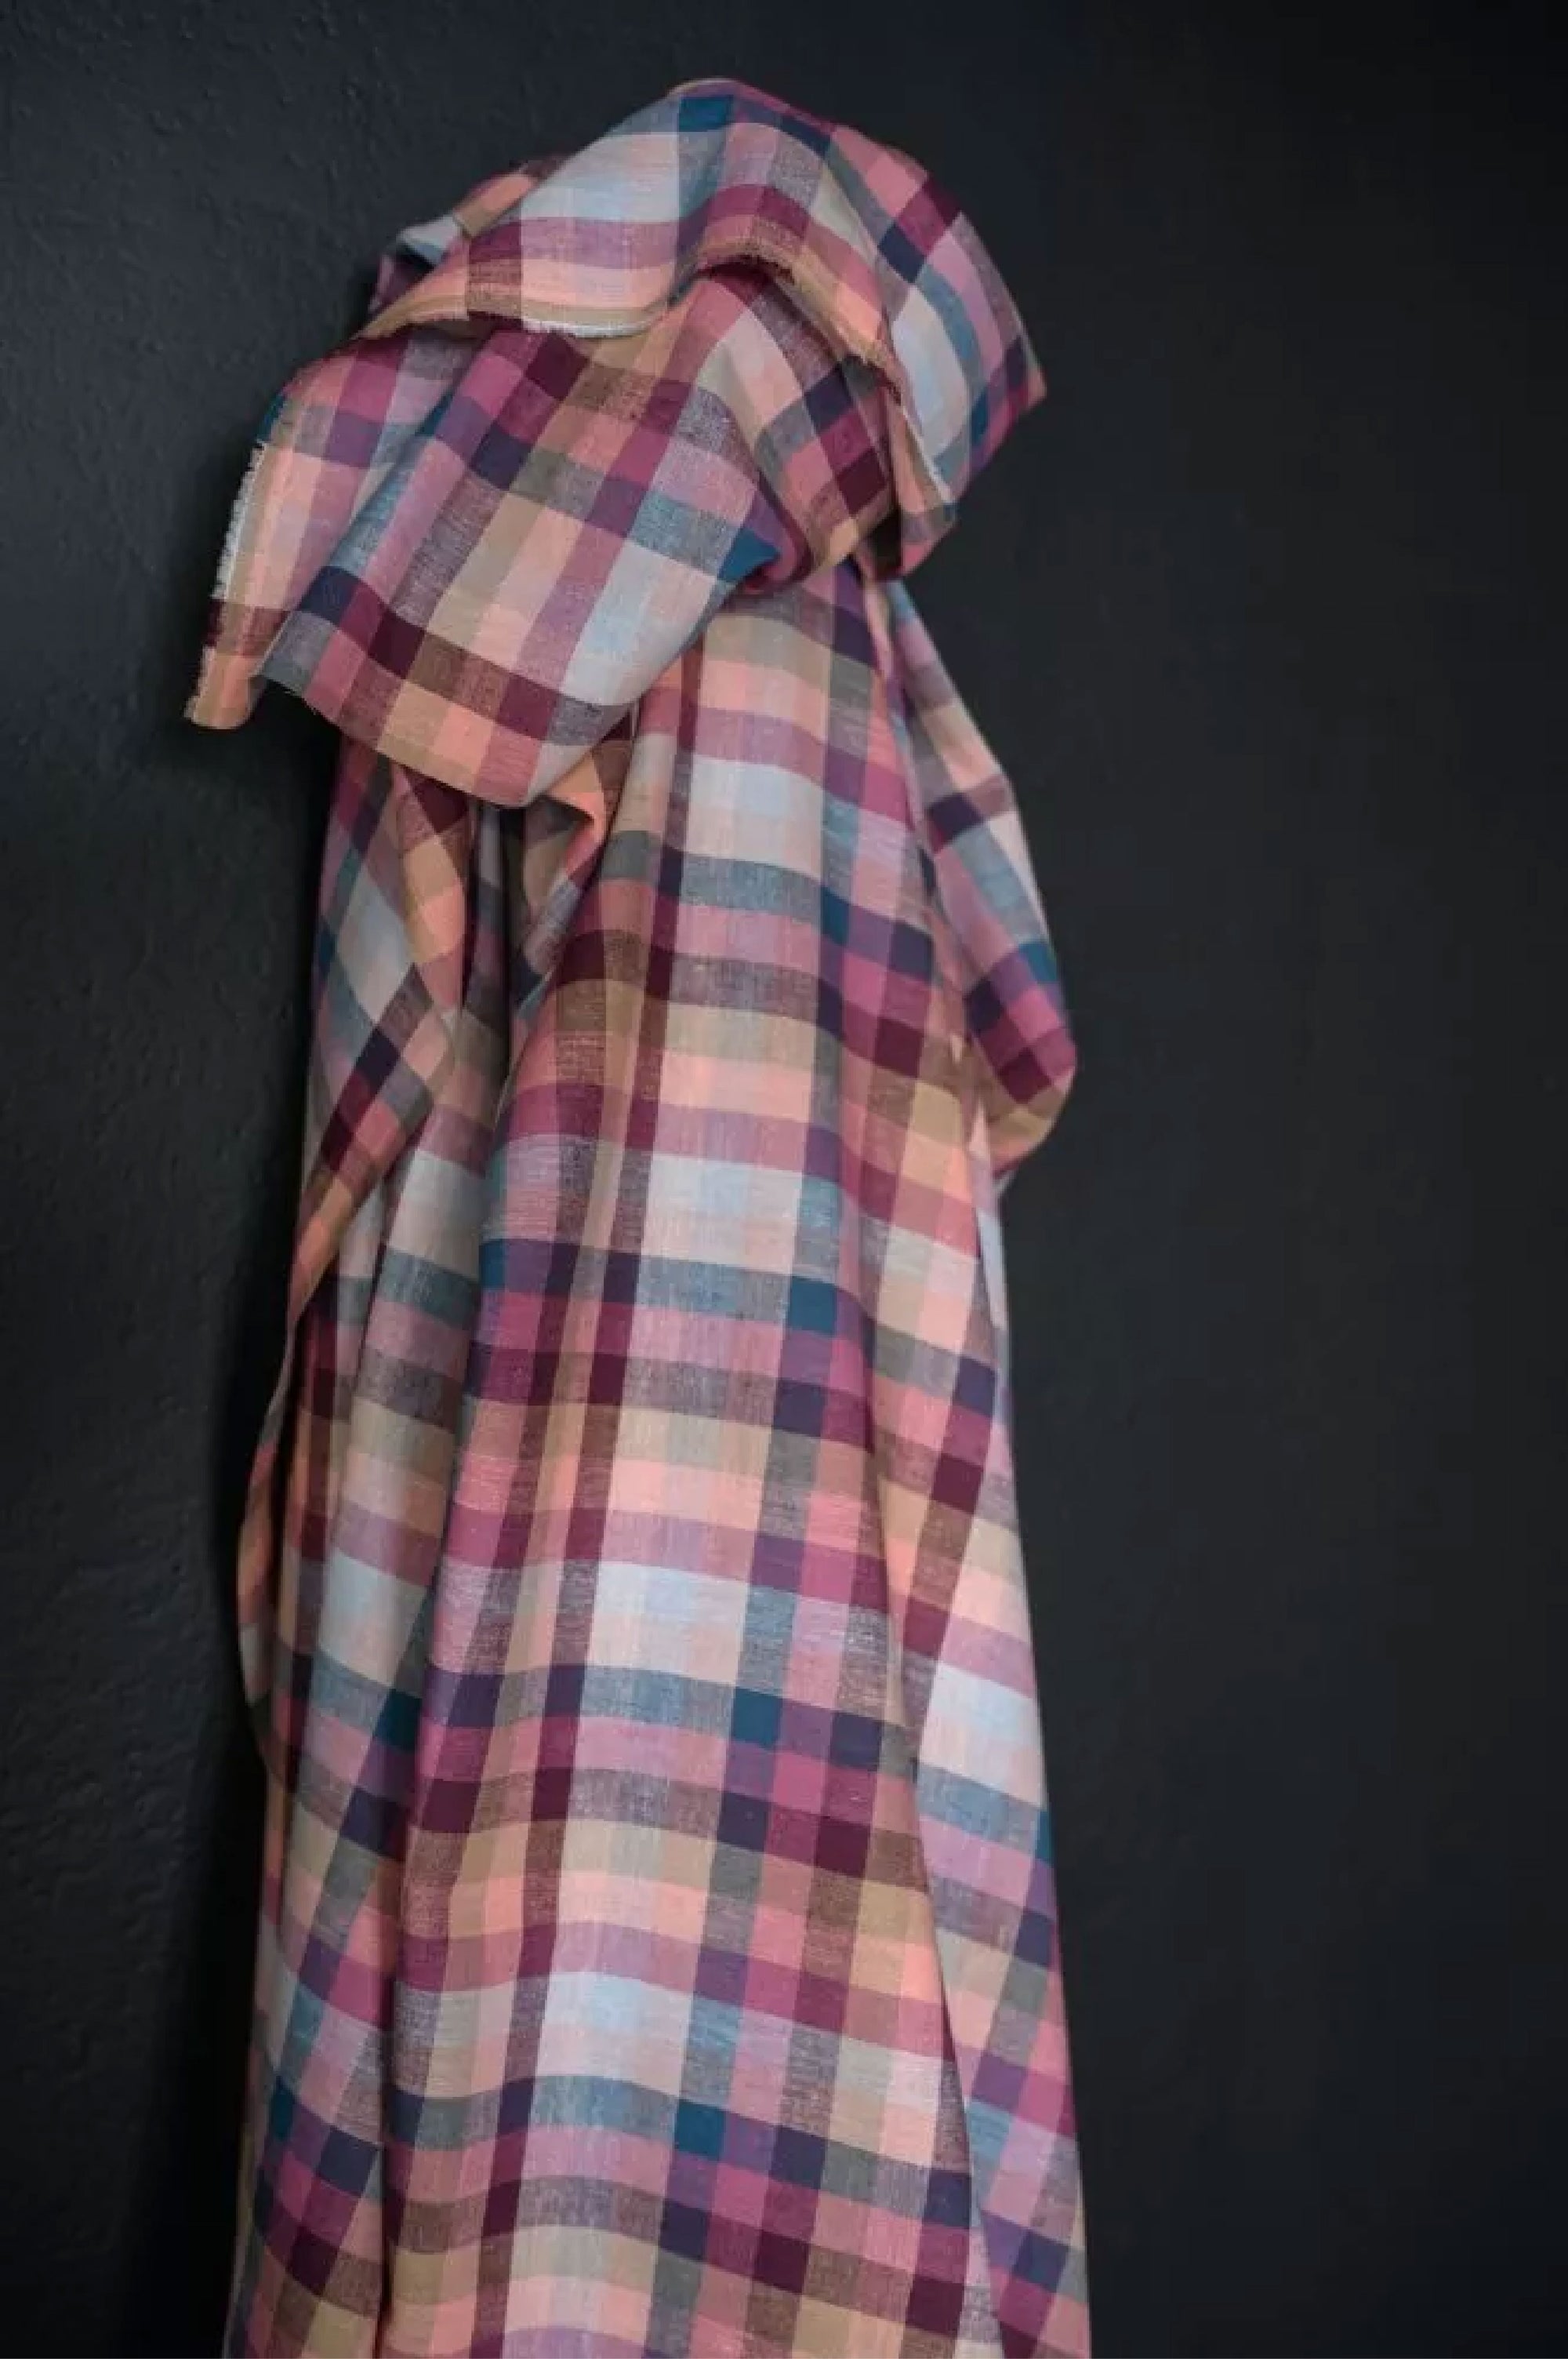 cotton and linen blend in the shade range of pinks, blues and purple gingham on a dark grey background.